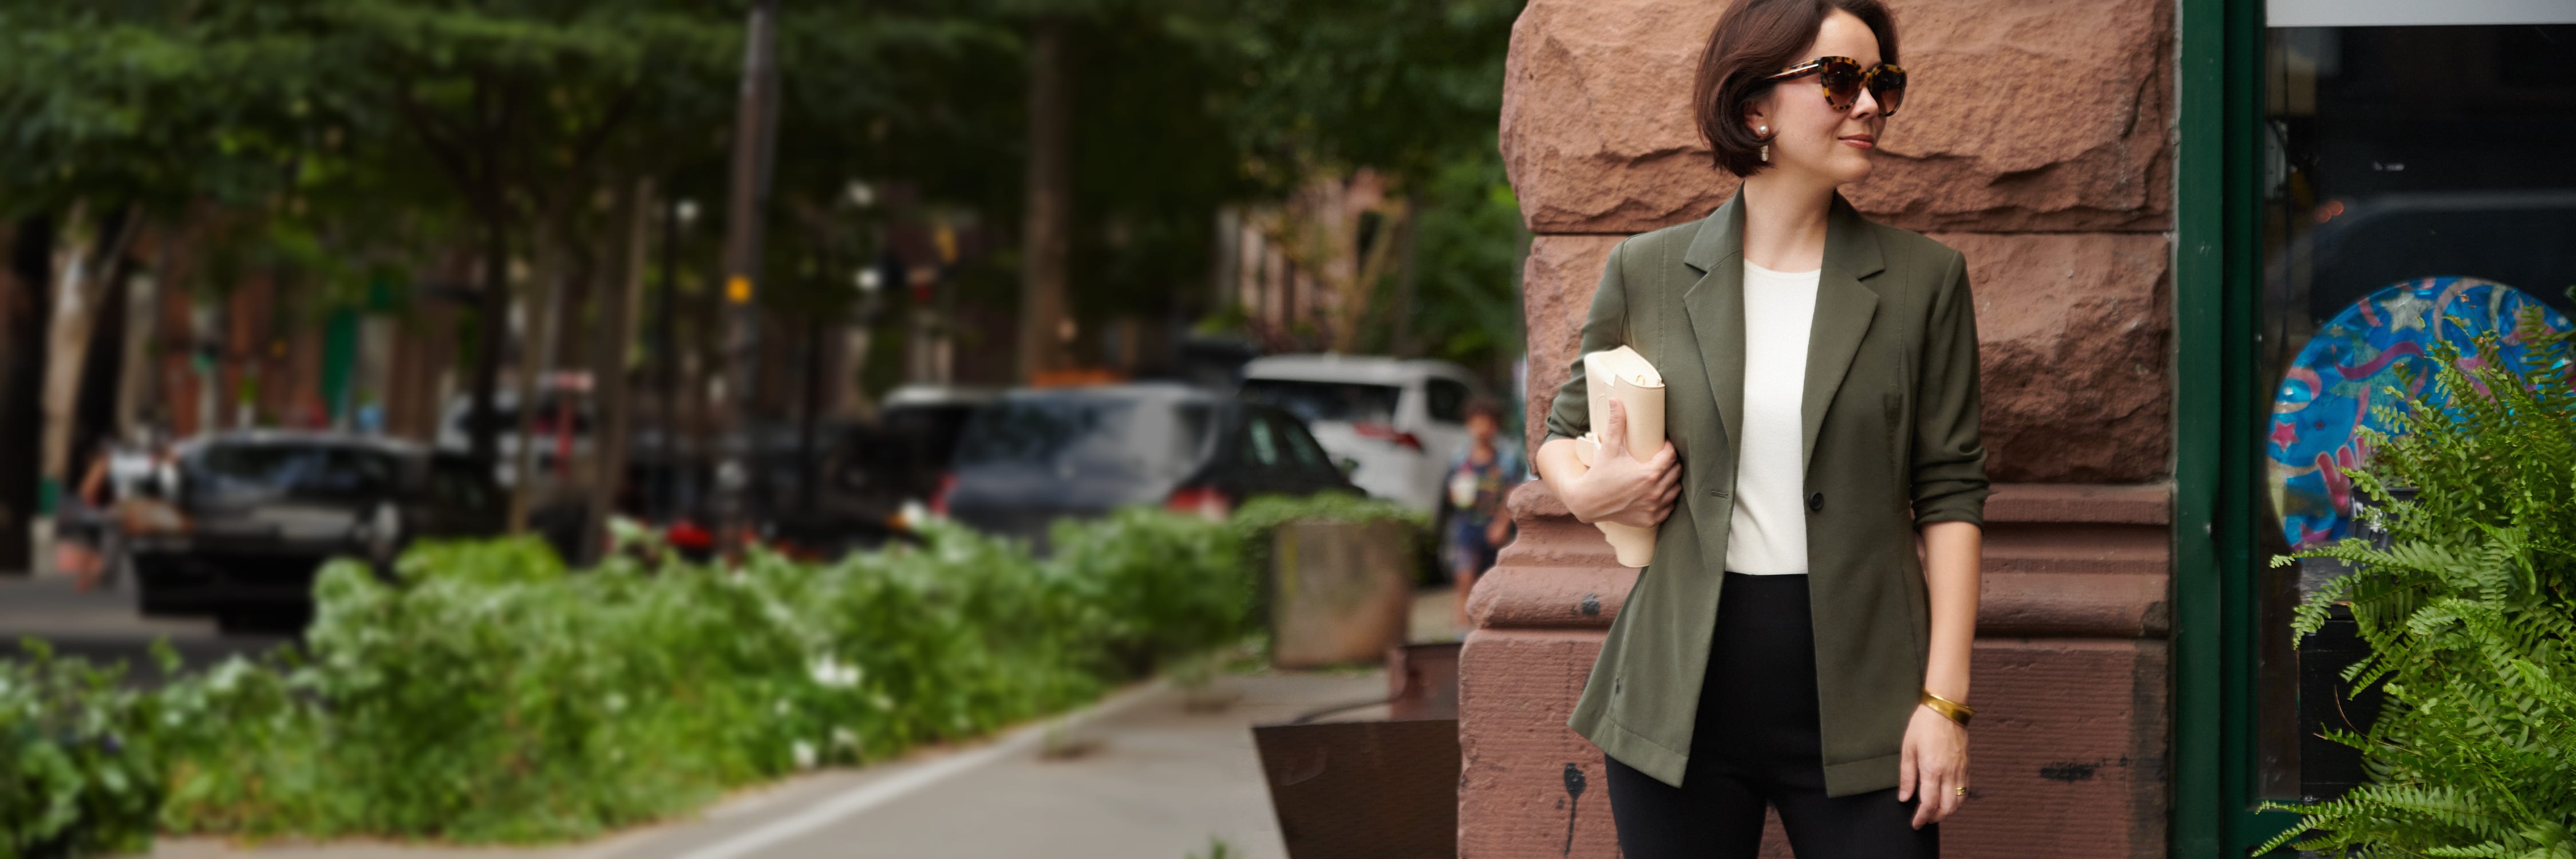 Sarah LaFleur, wearing the Moreland jacket in olive and sunglasses, carrying a cream-colored handbag and standing on a street corner in Brooklyn